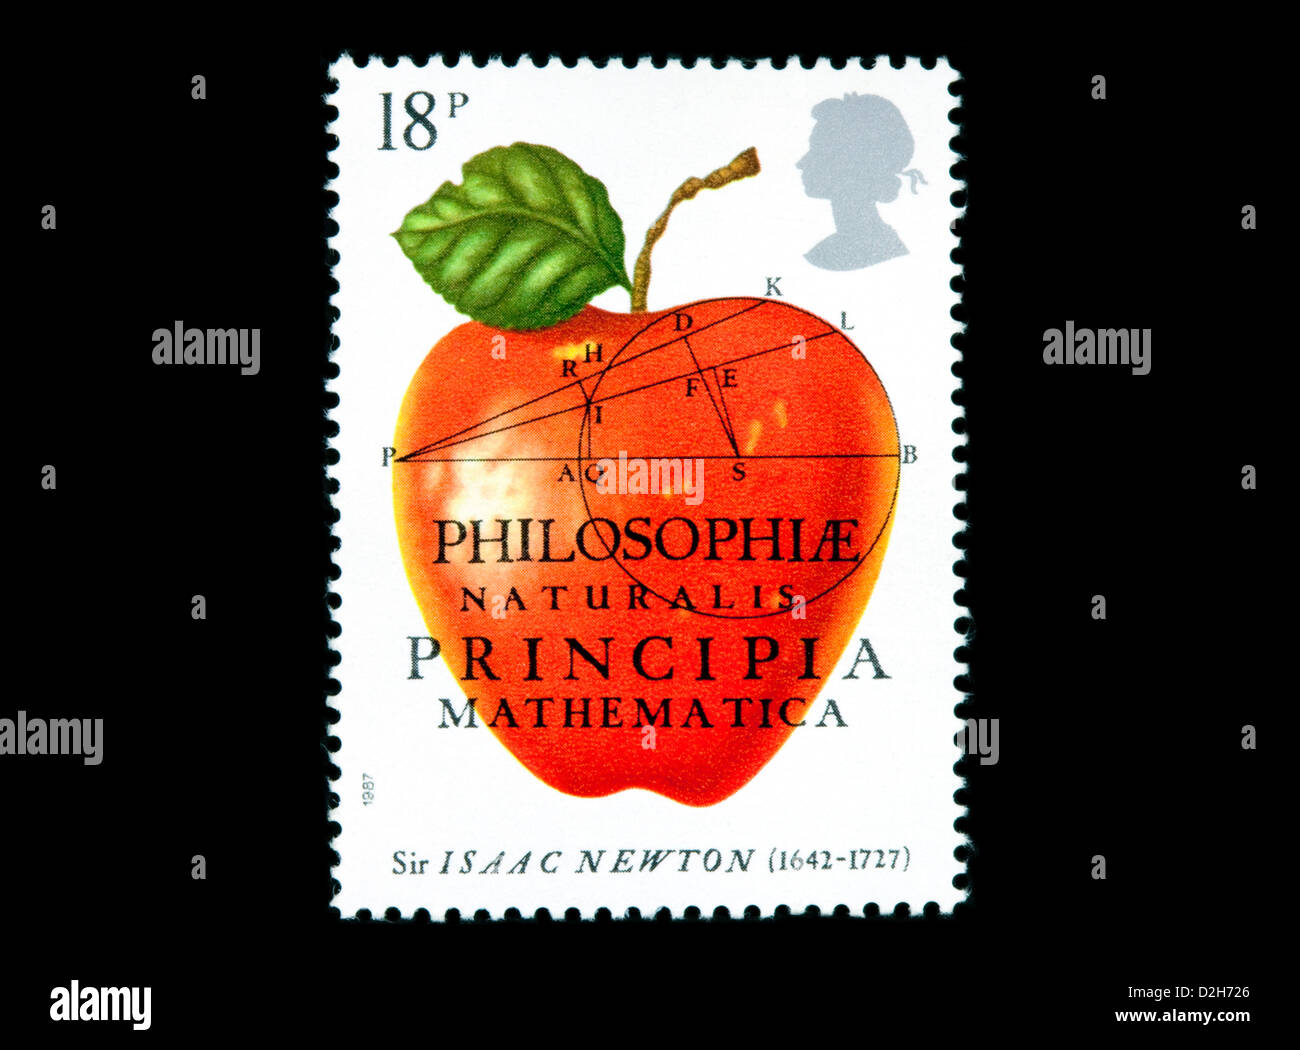 a 1987 UK british postage stamp commemorating Sir Isaac Newton, the apple and  discovery of gravity Stock Photo